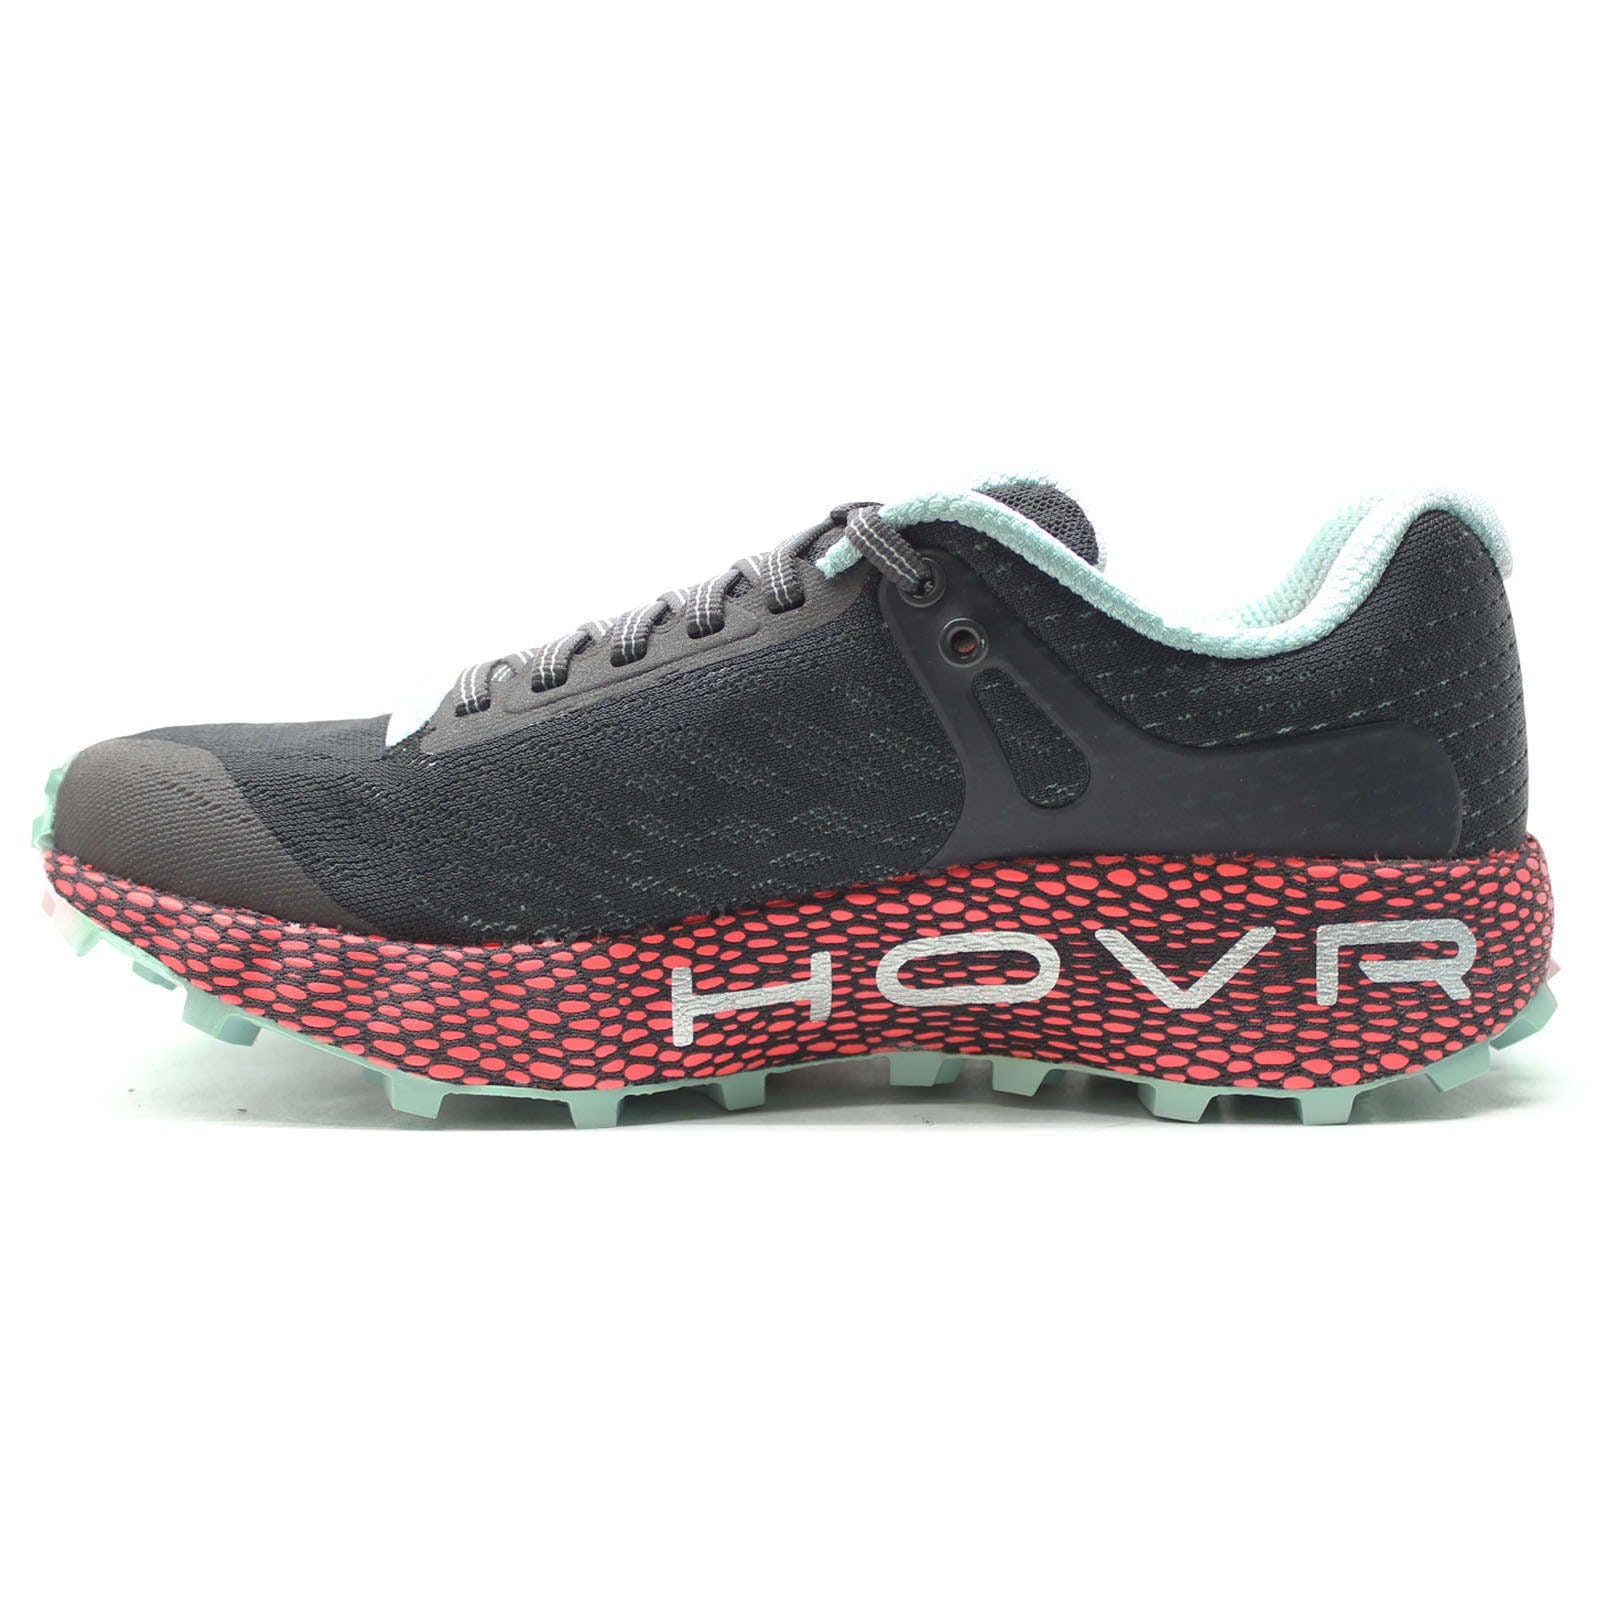 Under Armour HOVR Machina Off Road Synthetic Textile Women's Low-Top Trainers#color_grey